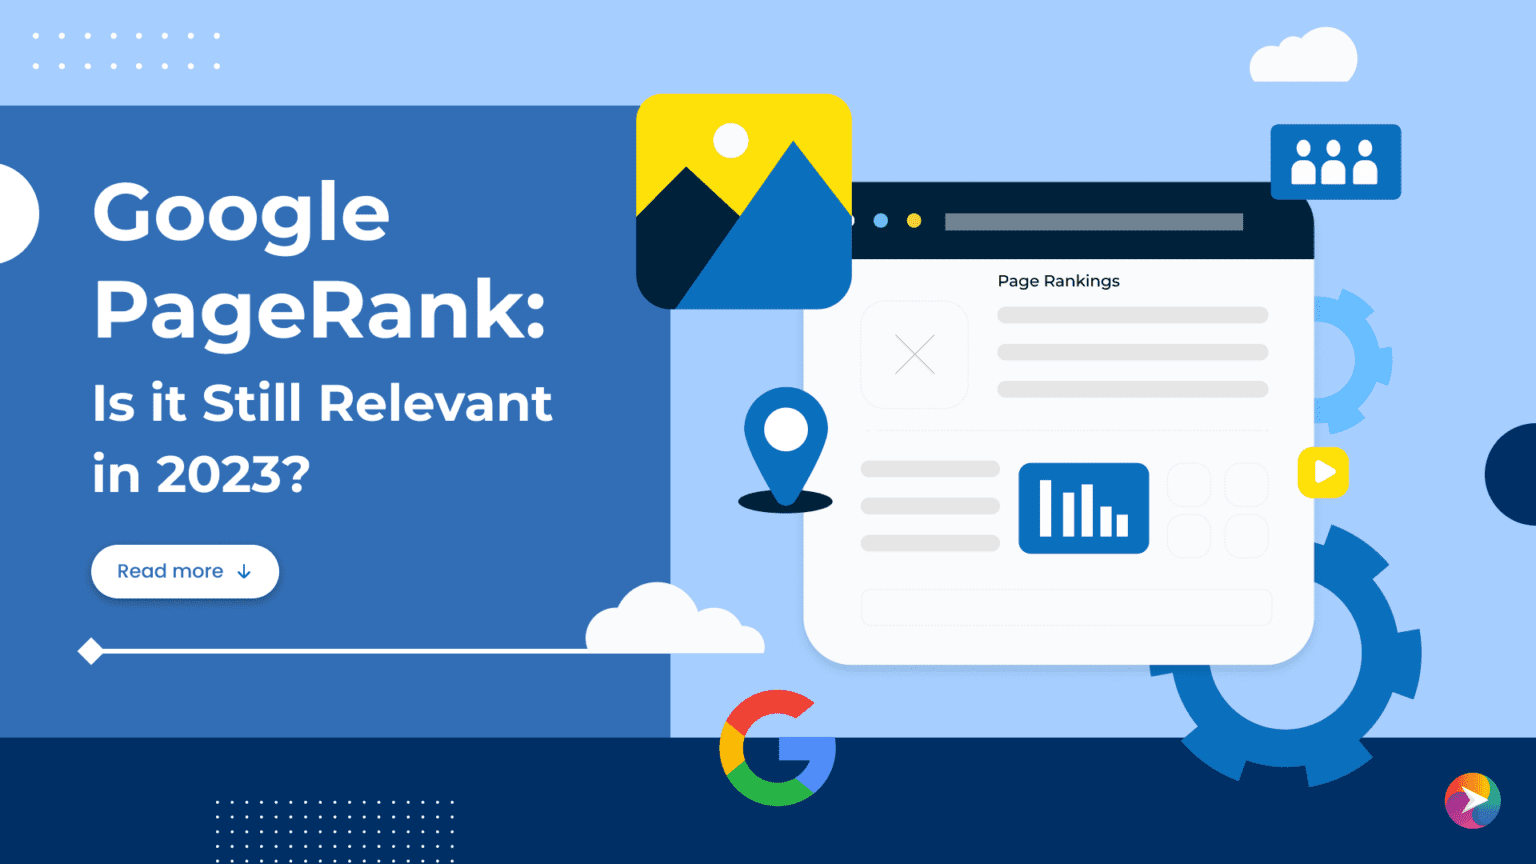 Google PageRank: Is it Still Relevant in 2023?